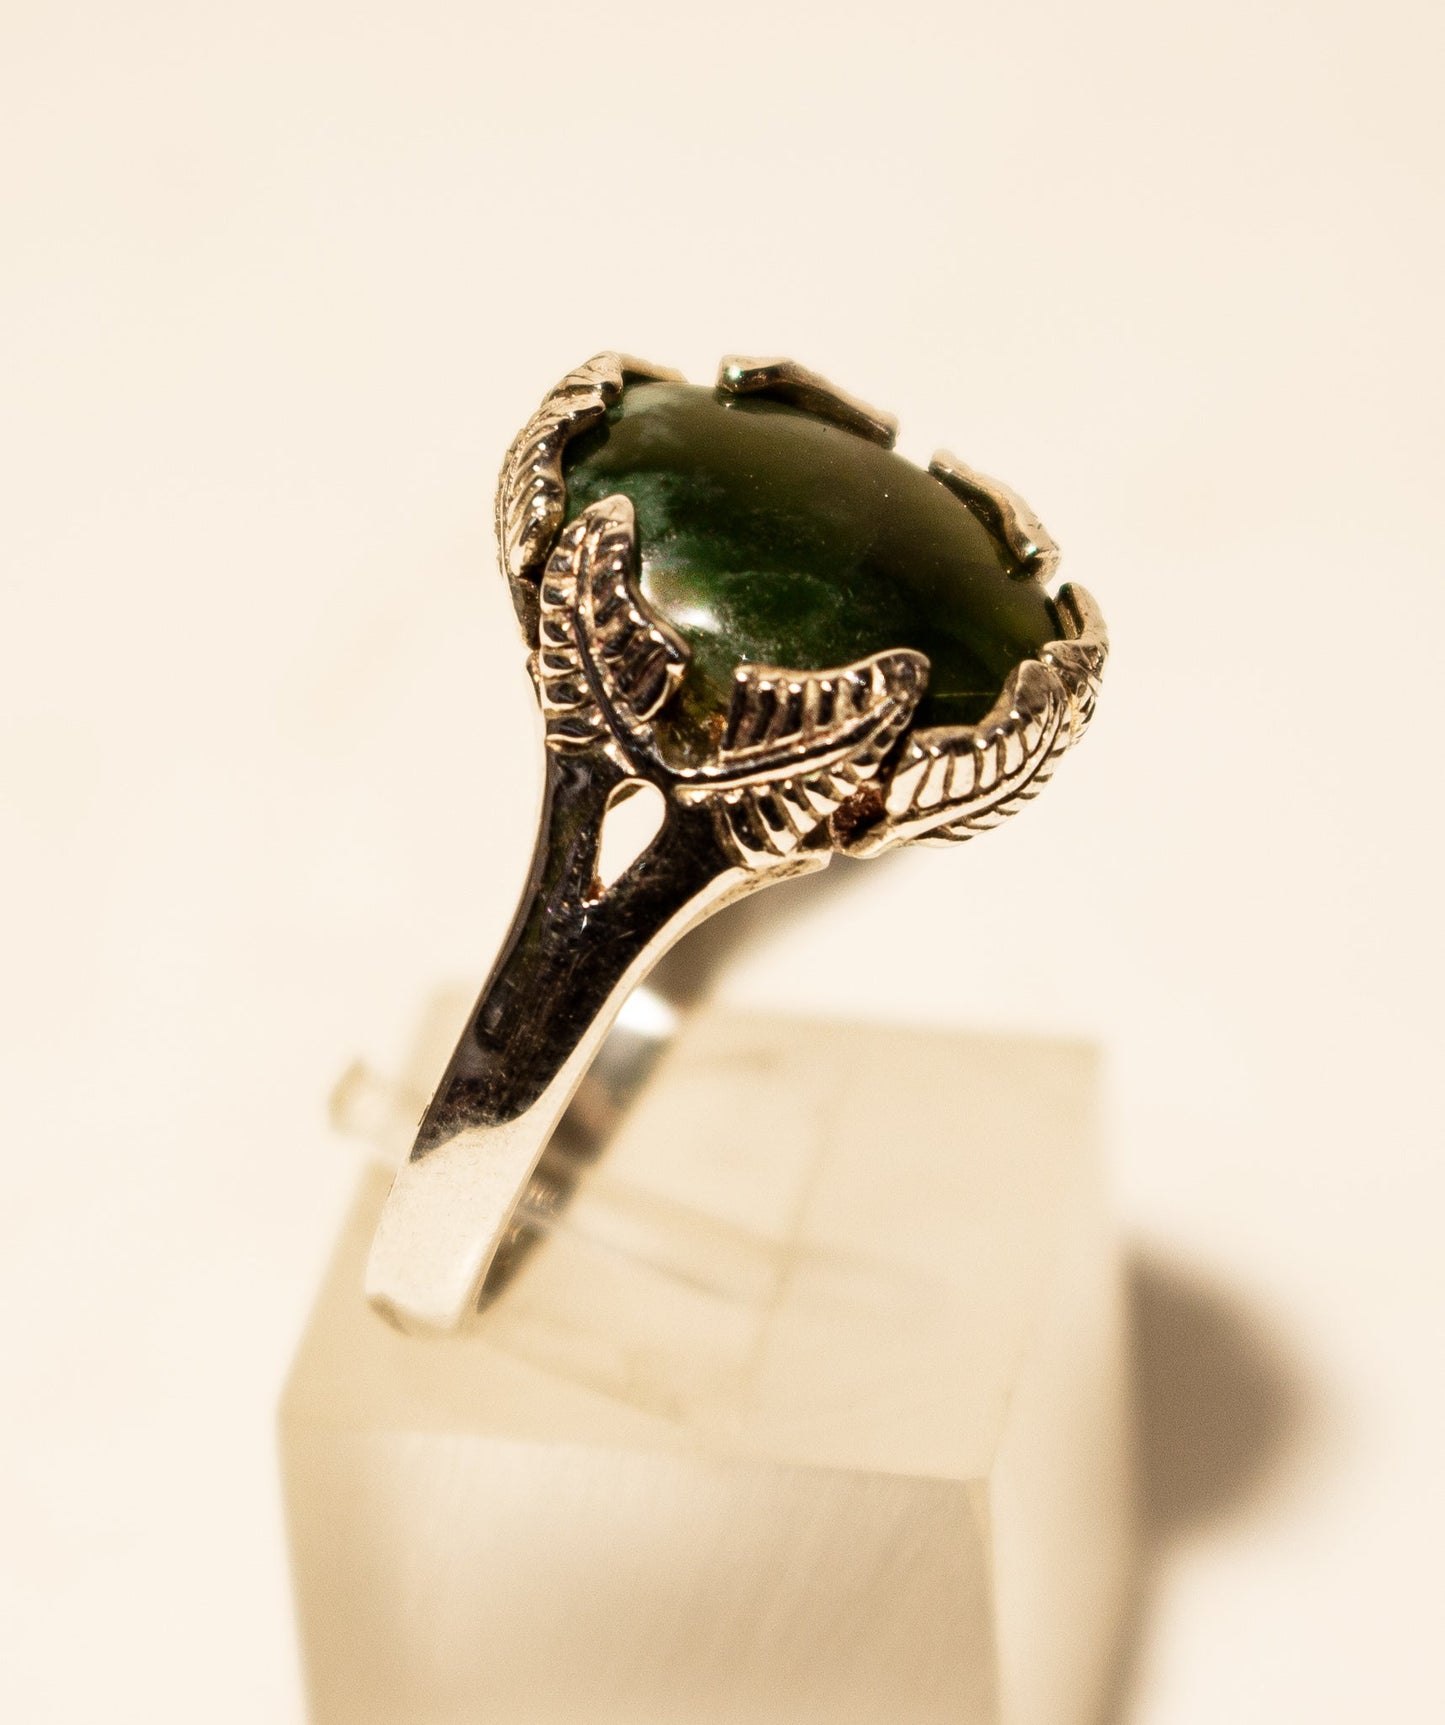 Ring –
Greenstone with Silver Fern Detail